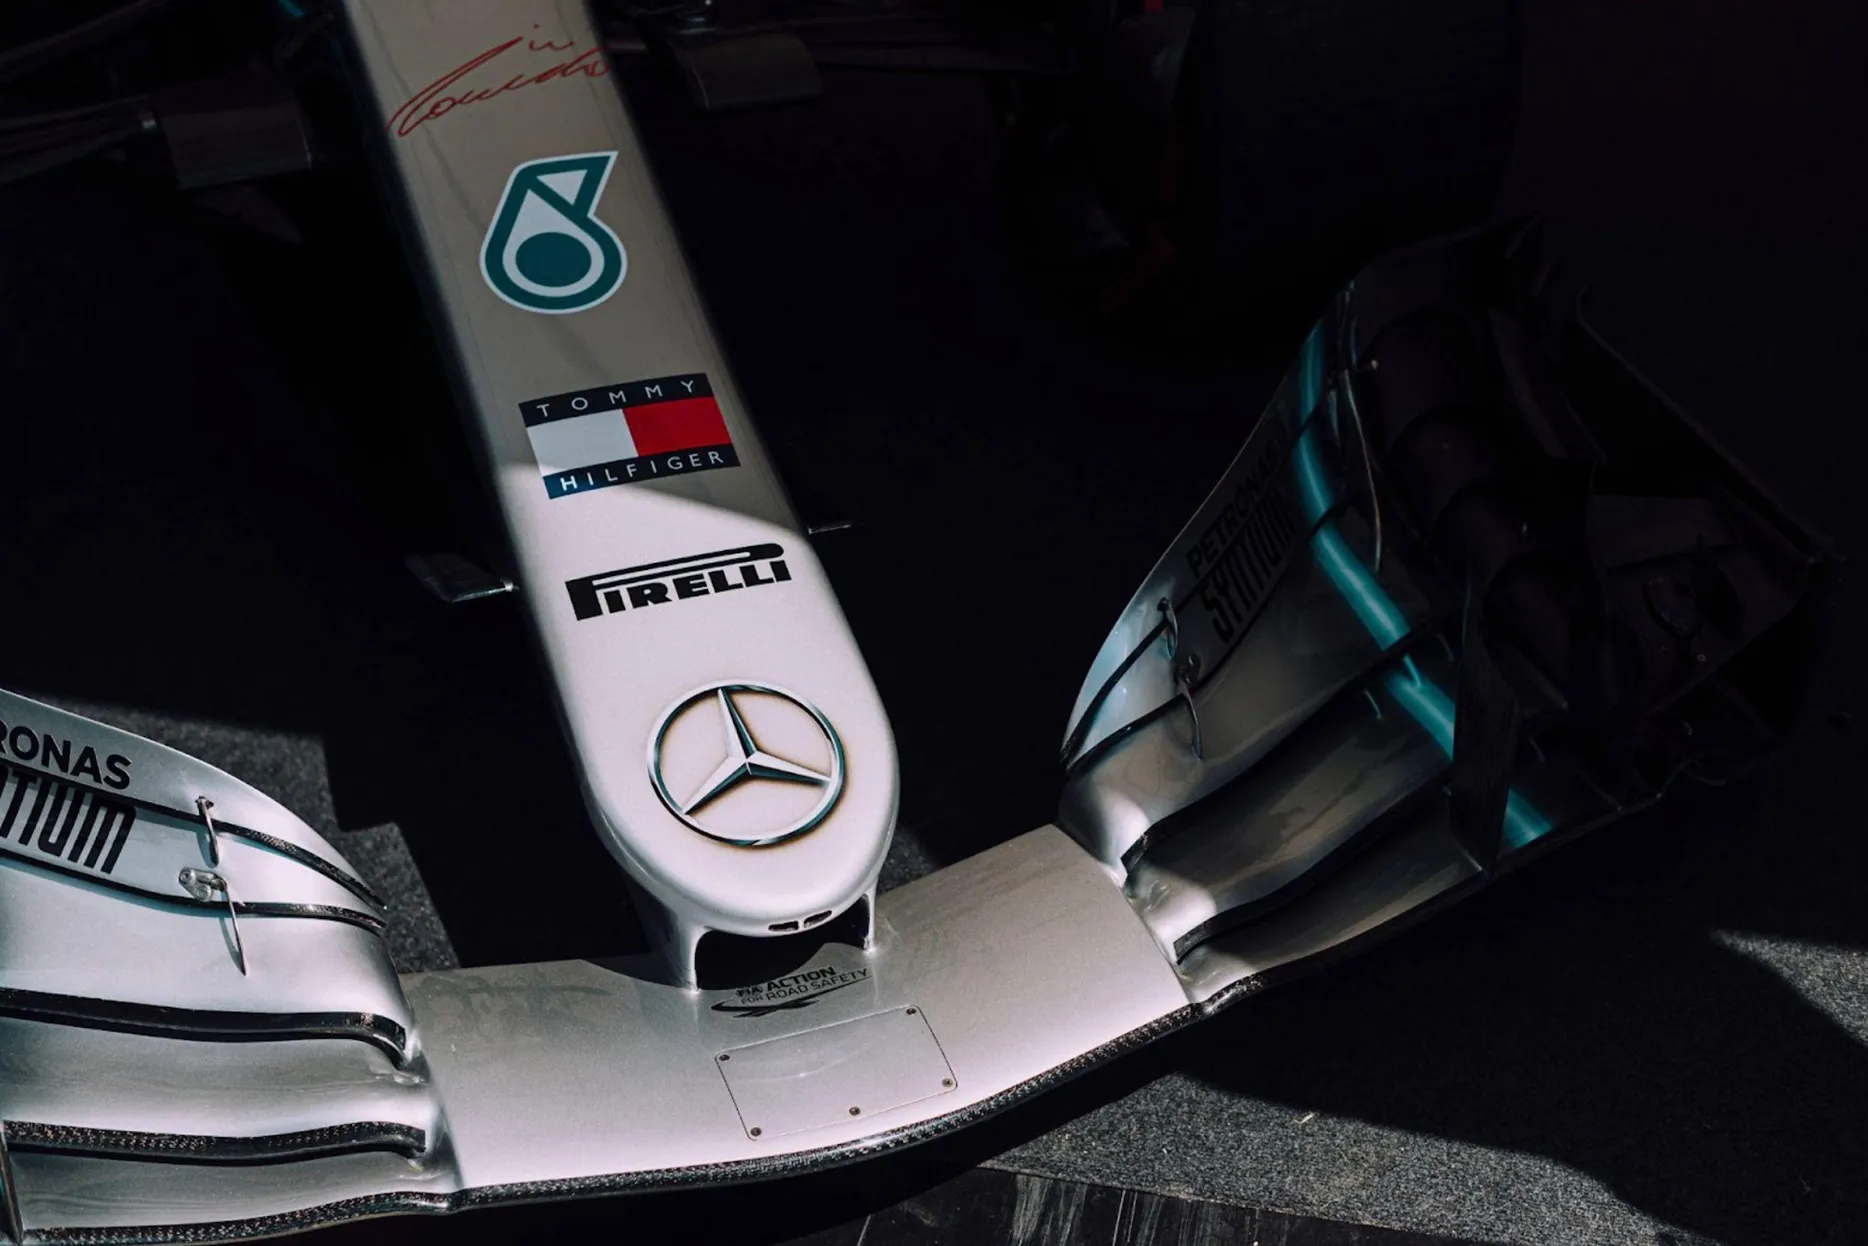 A close up of the nose of Lewis Hamilton’s silver Mercedes-AMG F1 car.